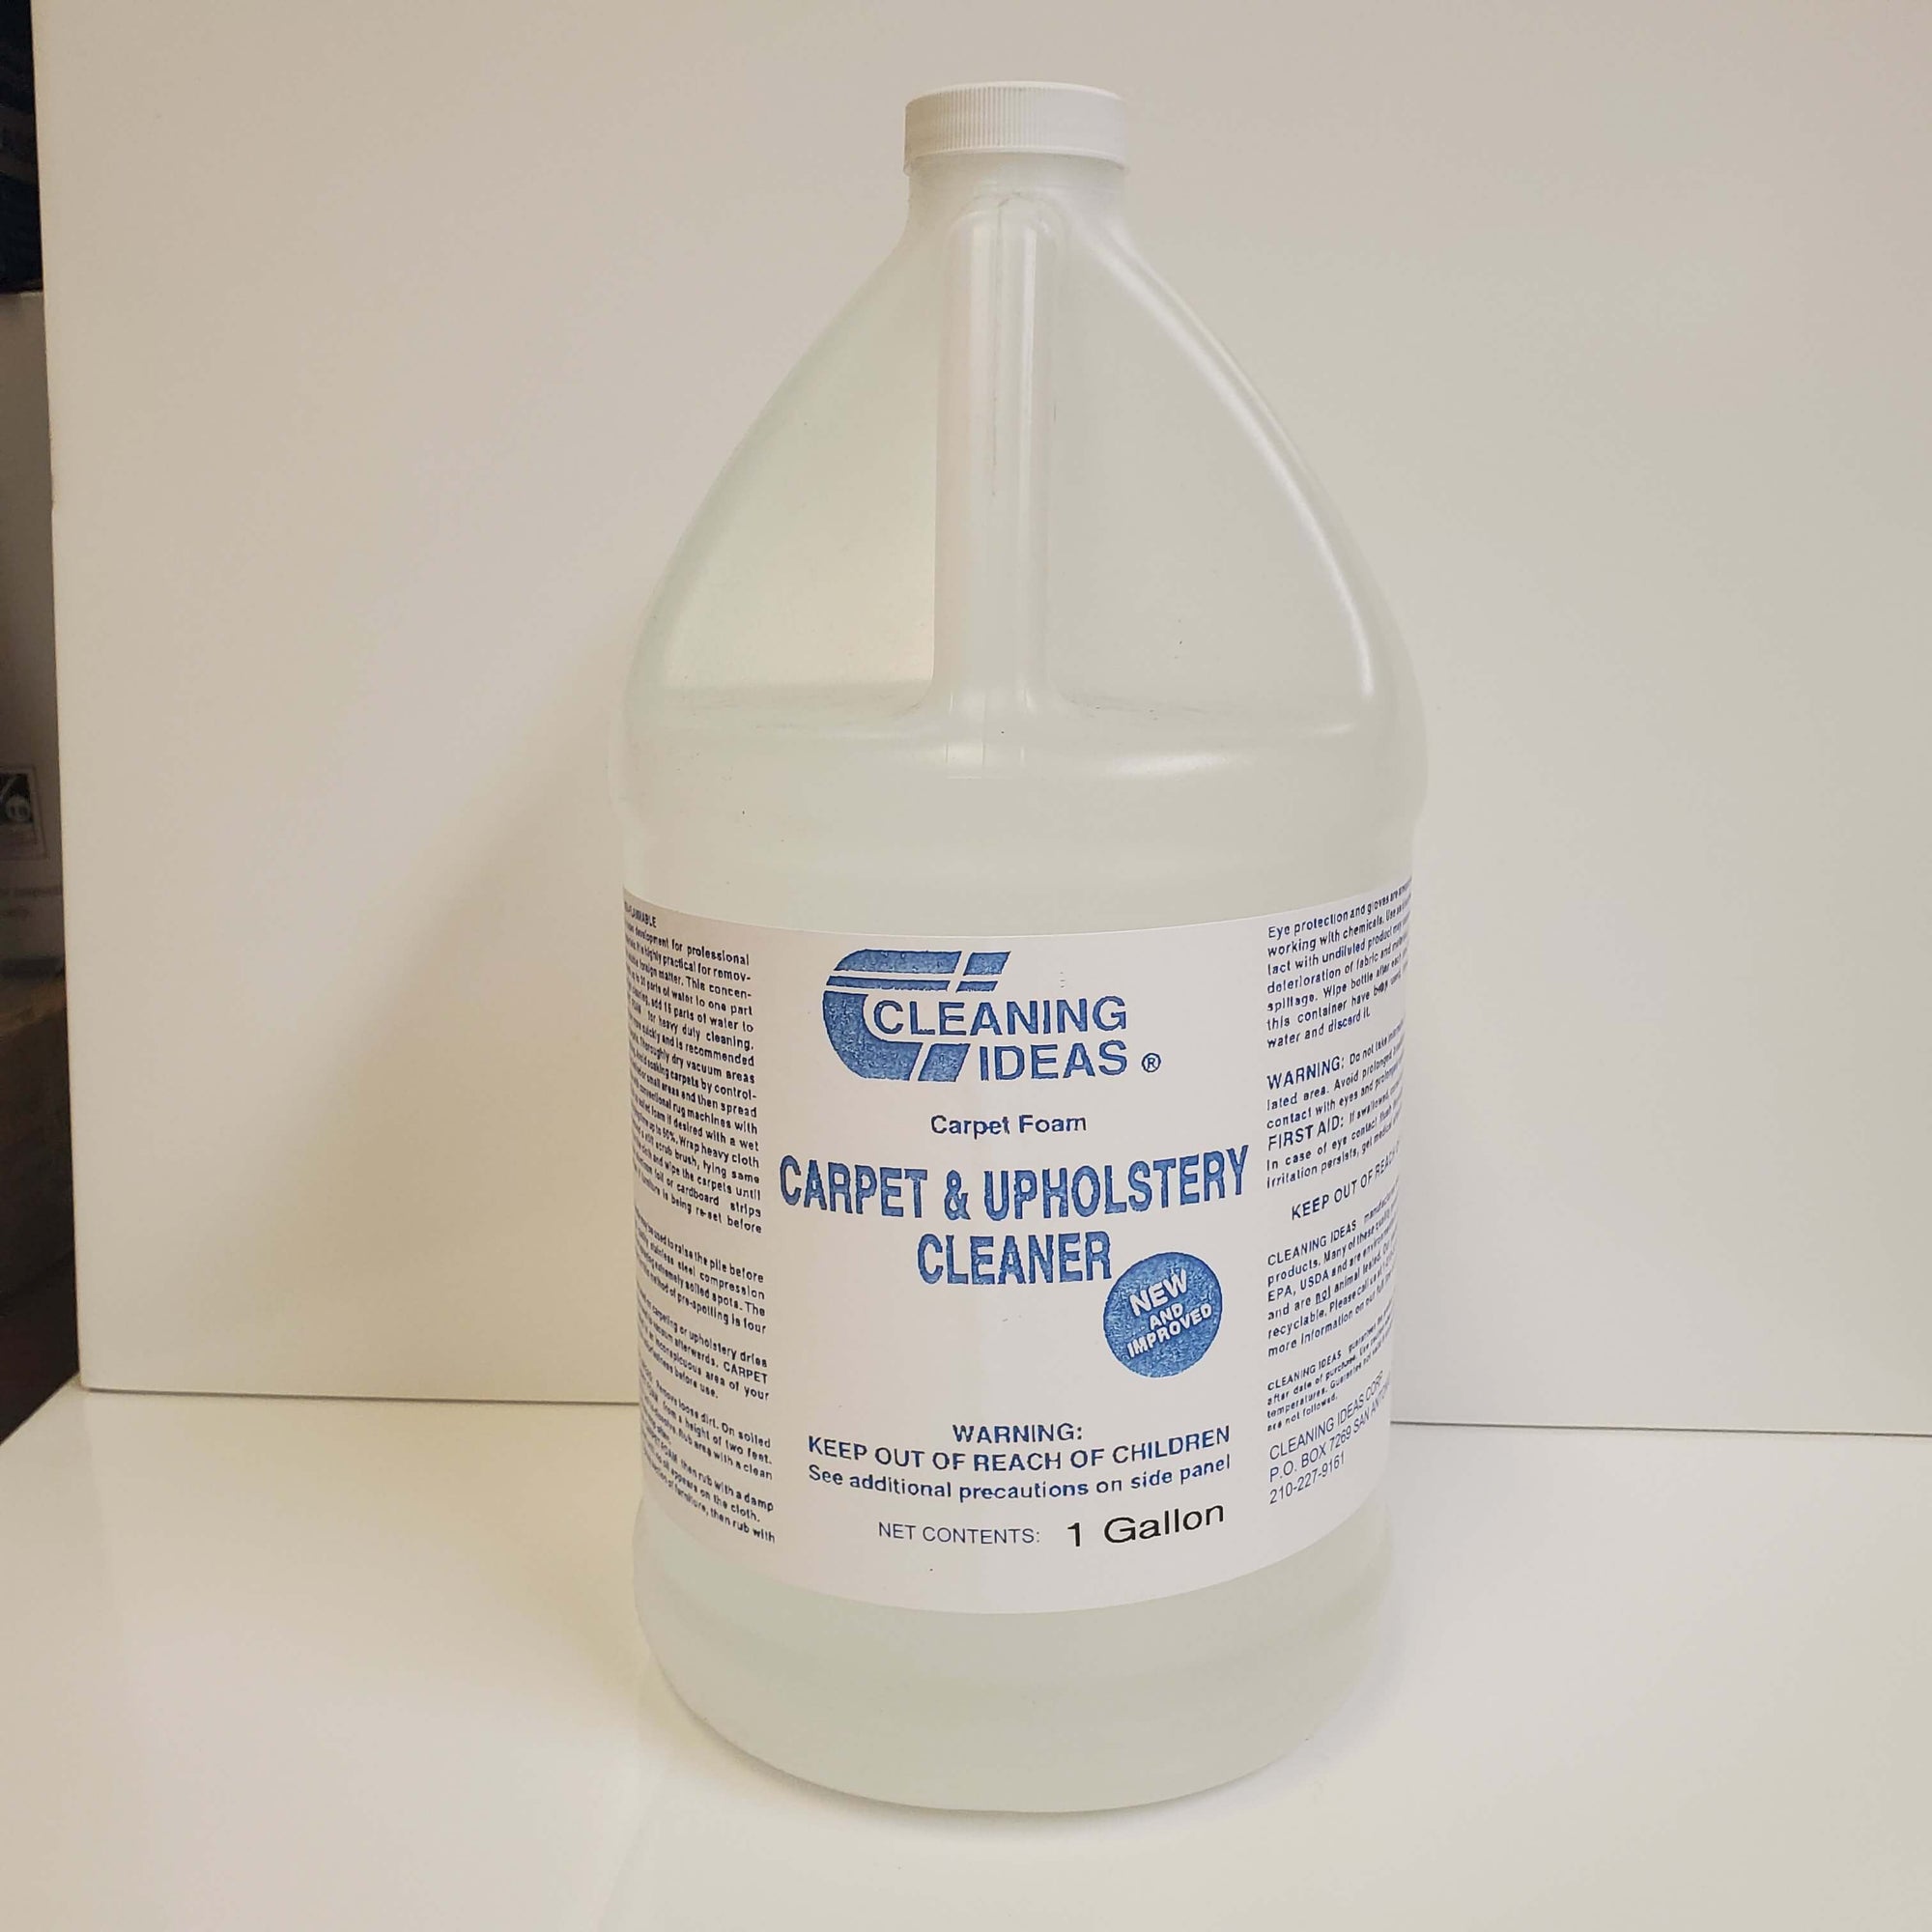 Carpet Foam - Carpet and Upholstery Cleaner